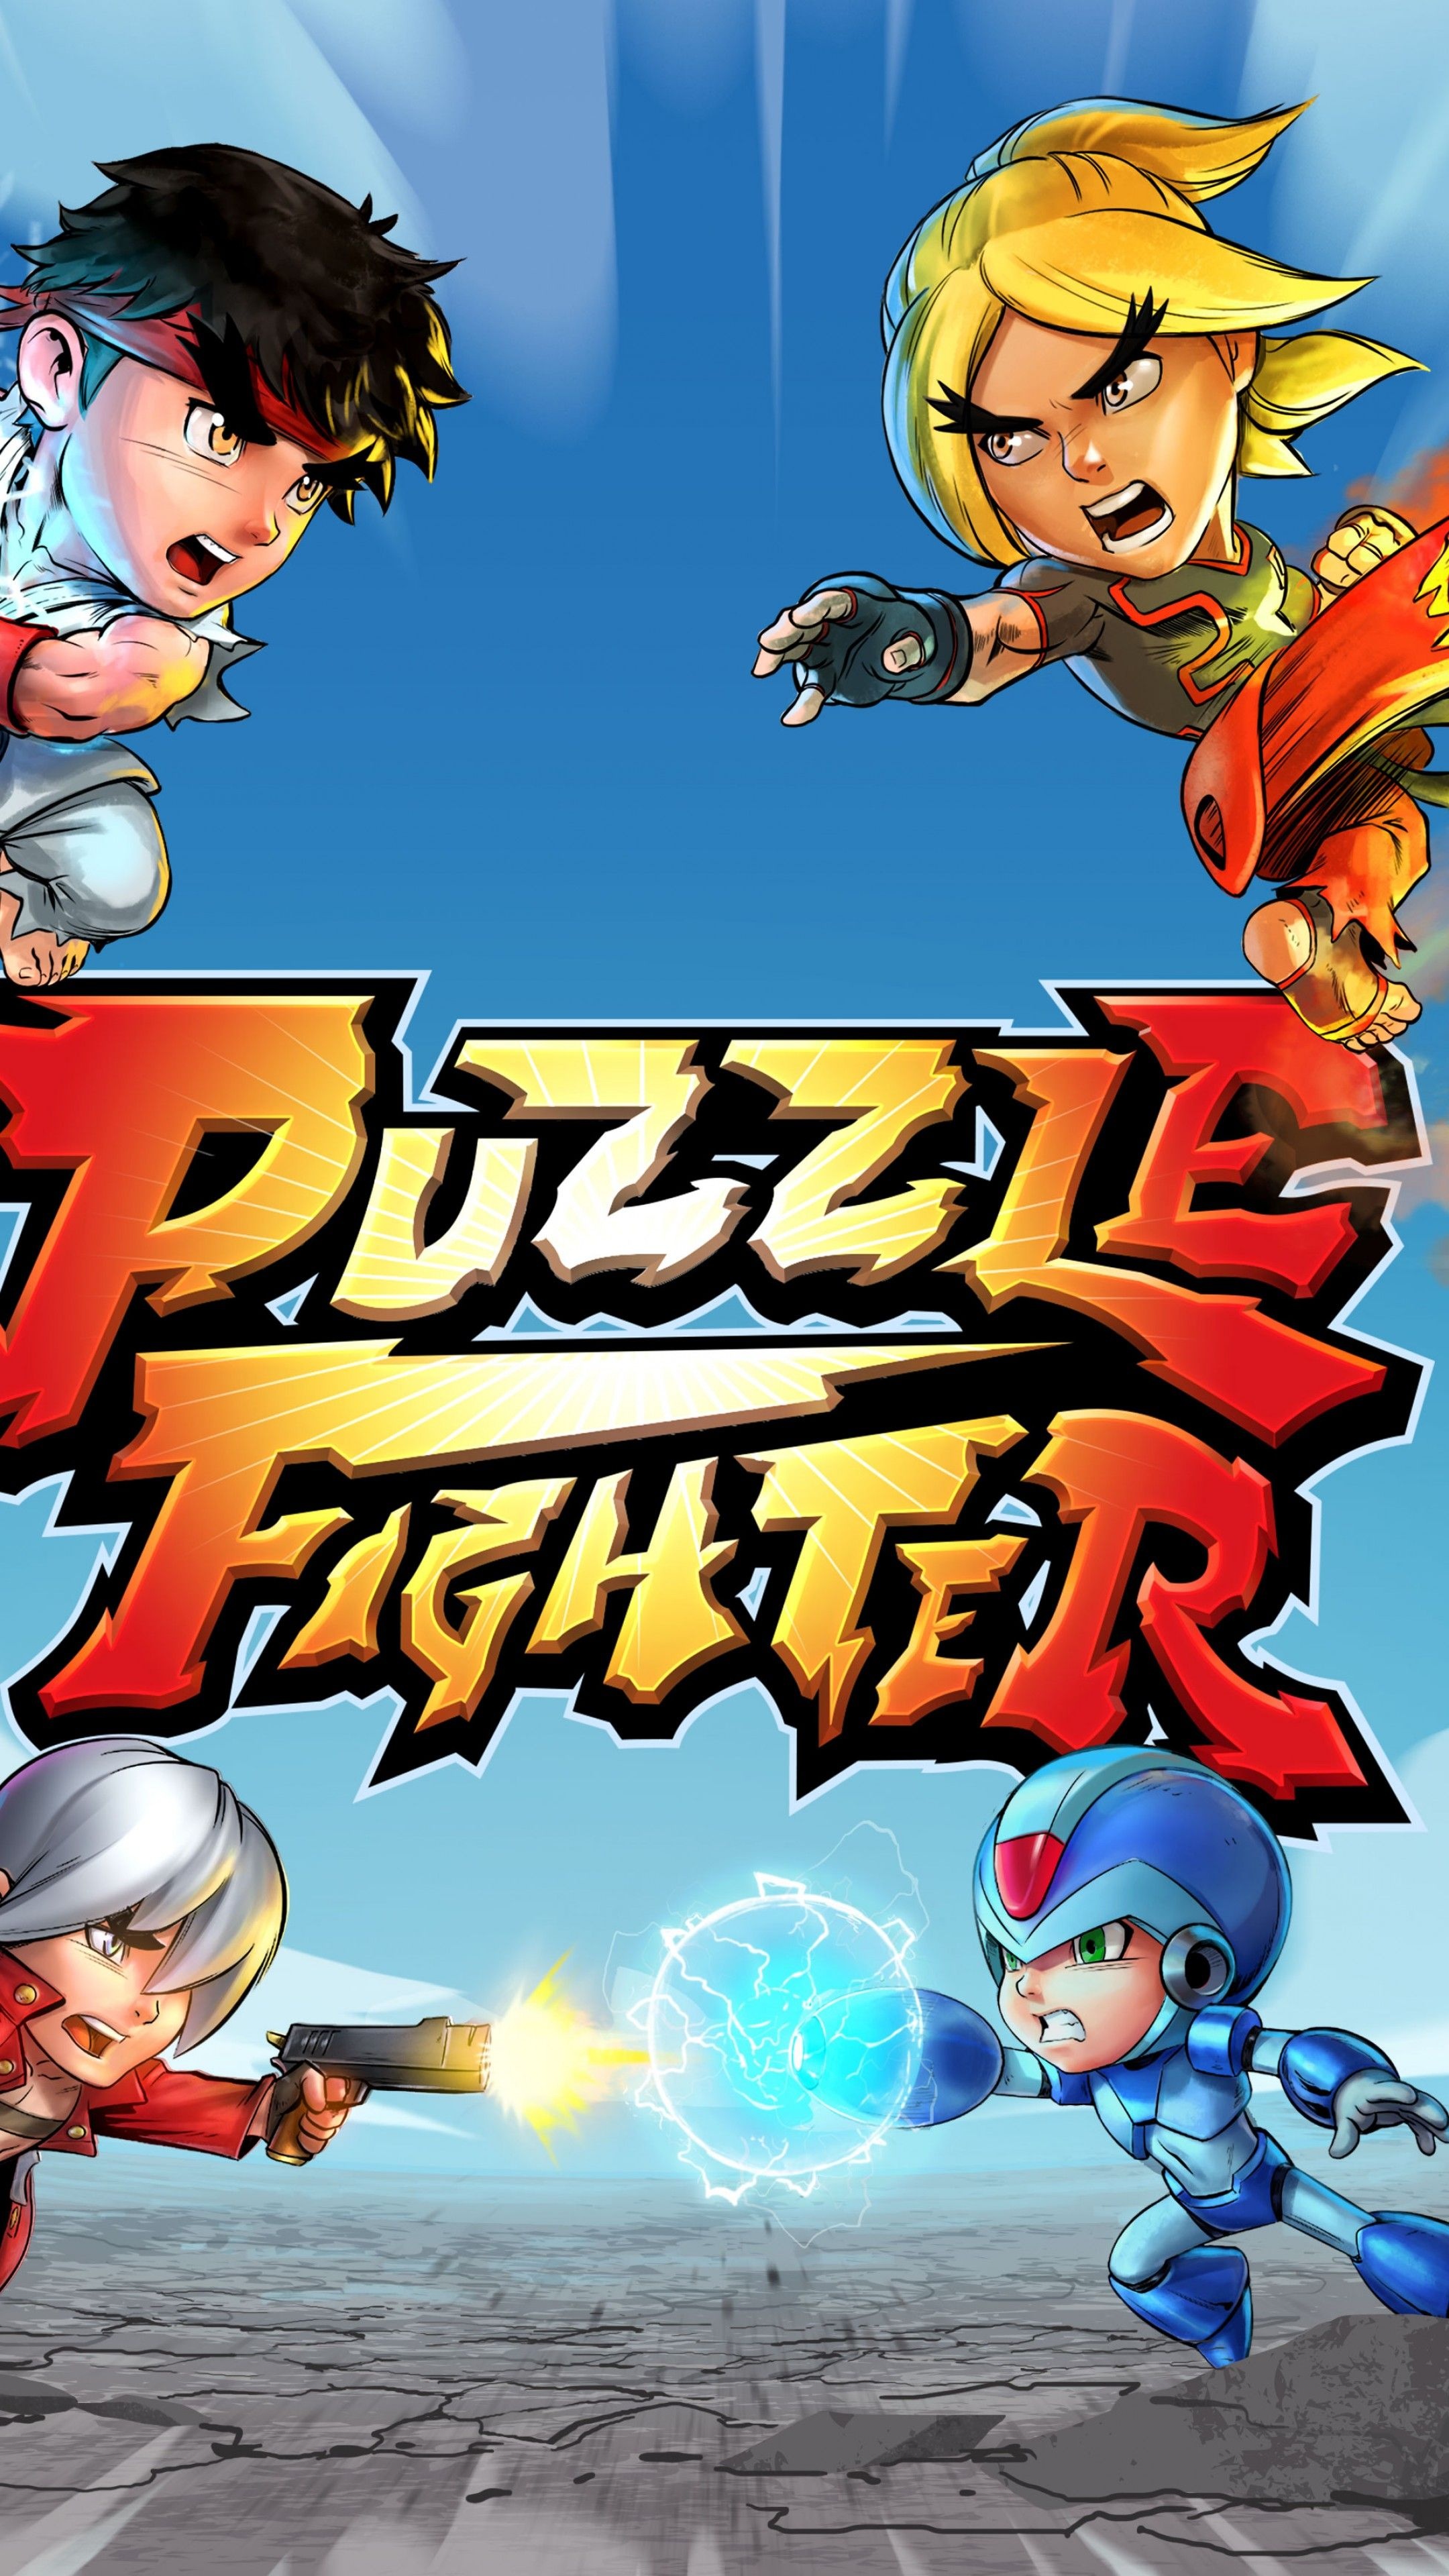 Puzzle Game, Fighter wallpapers, Intense battles, Gaming immersion, 2160x3840 4K Phone